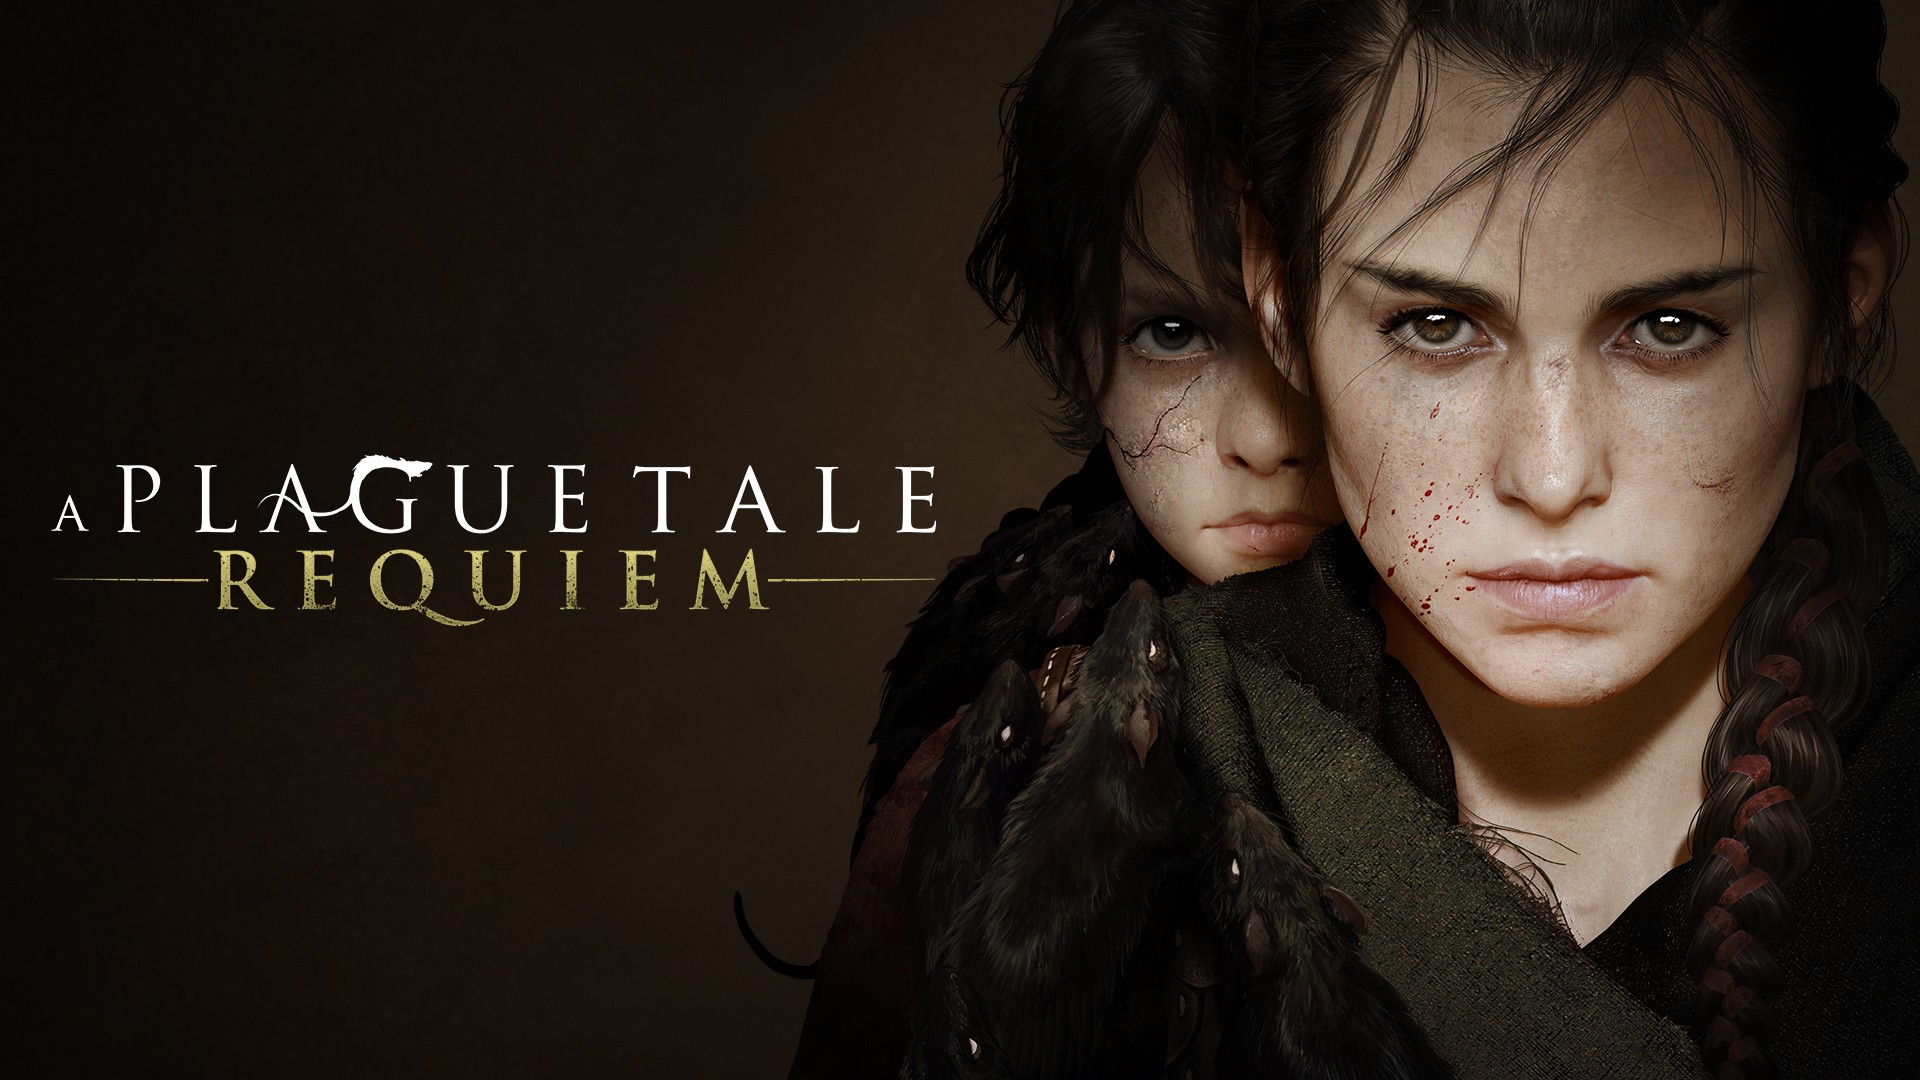 A Plague Tale: Requiem will easily take the title of this year's